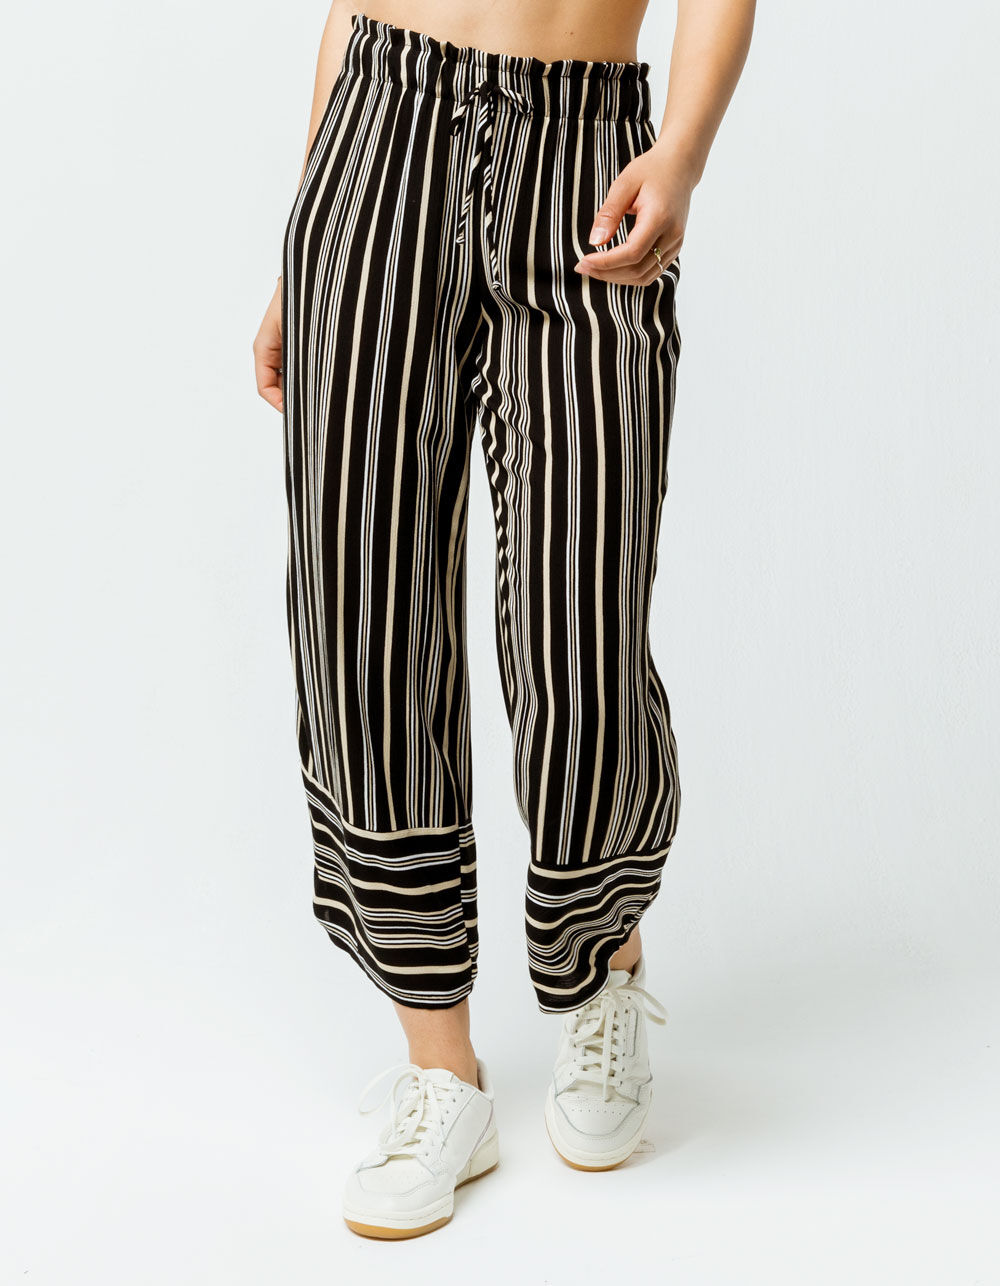 SKY AND SPARROW Stripe Crop Womens Wide Leg Pants image number 0